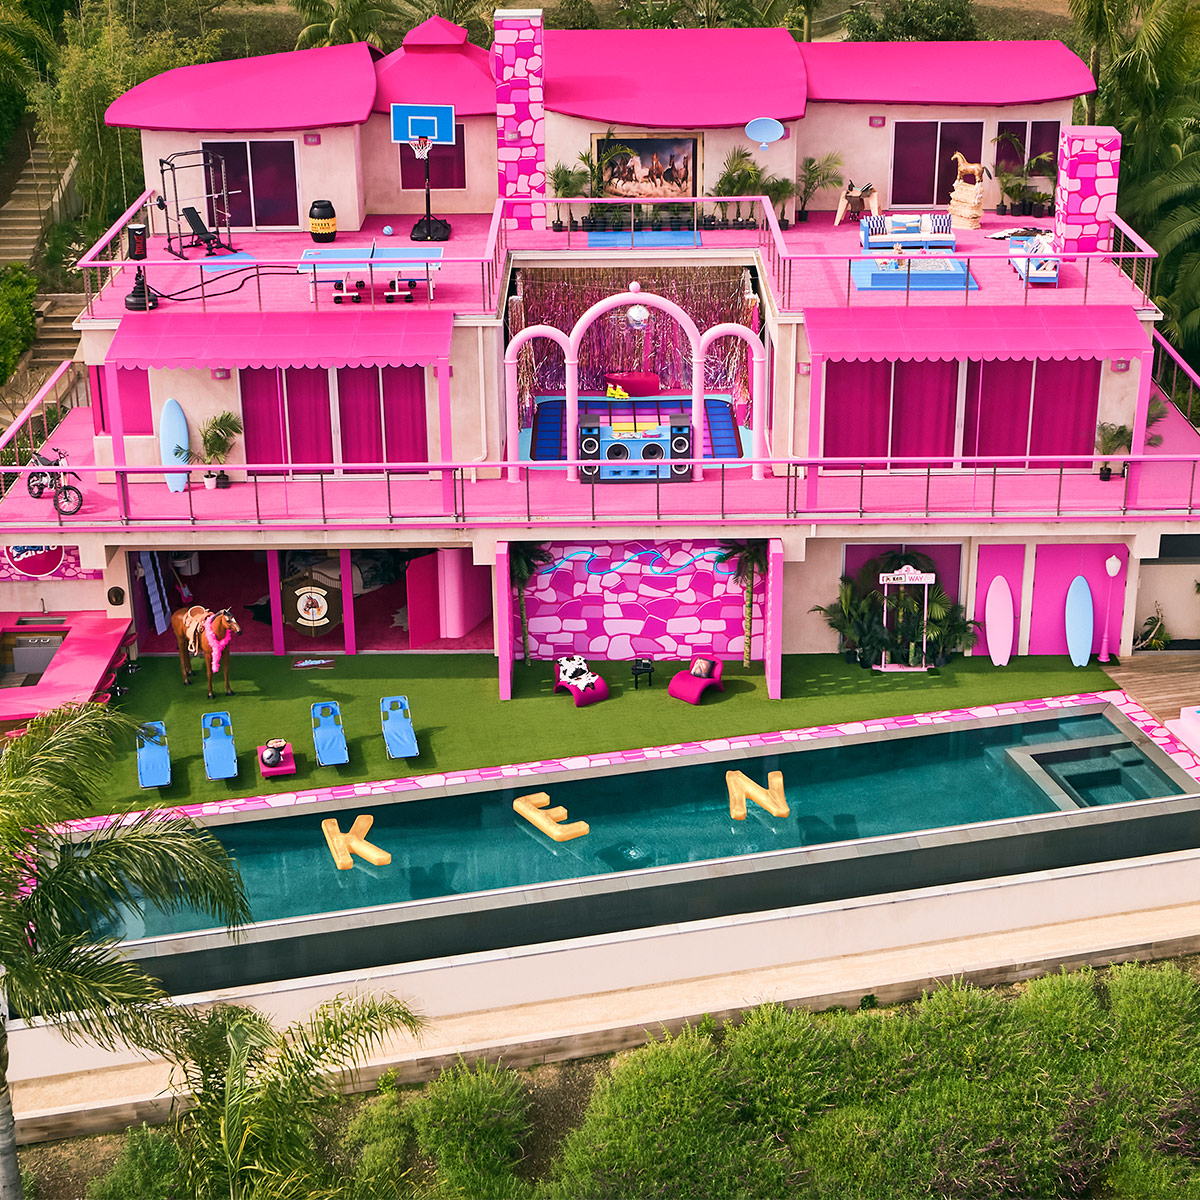 Barbie and Ken unveil bright-pink lifesize dollhouse in Malibu